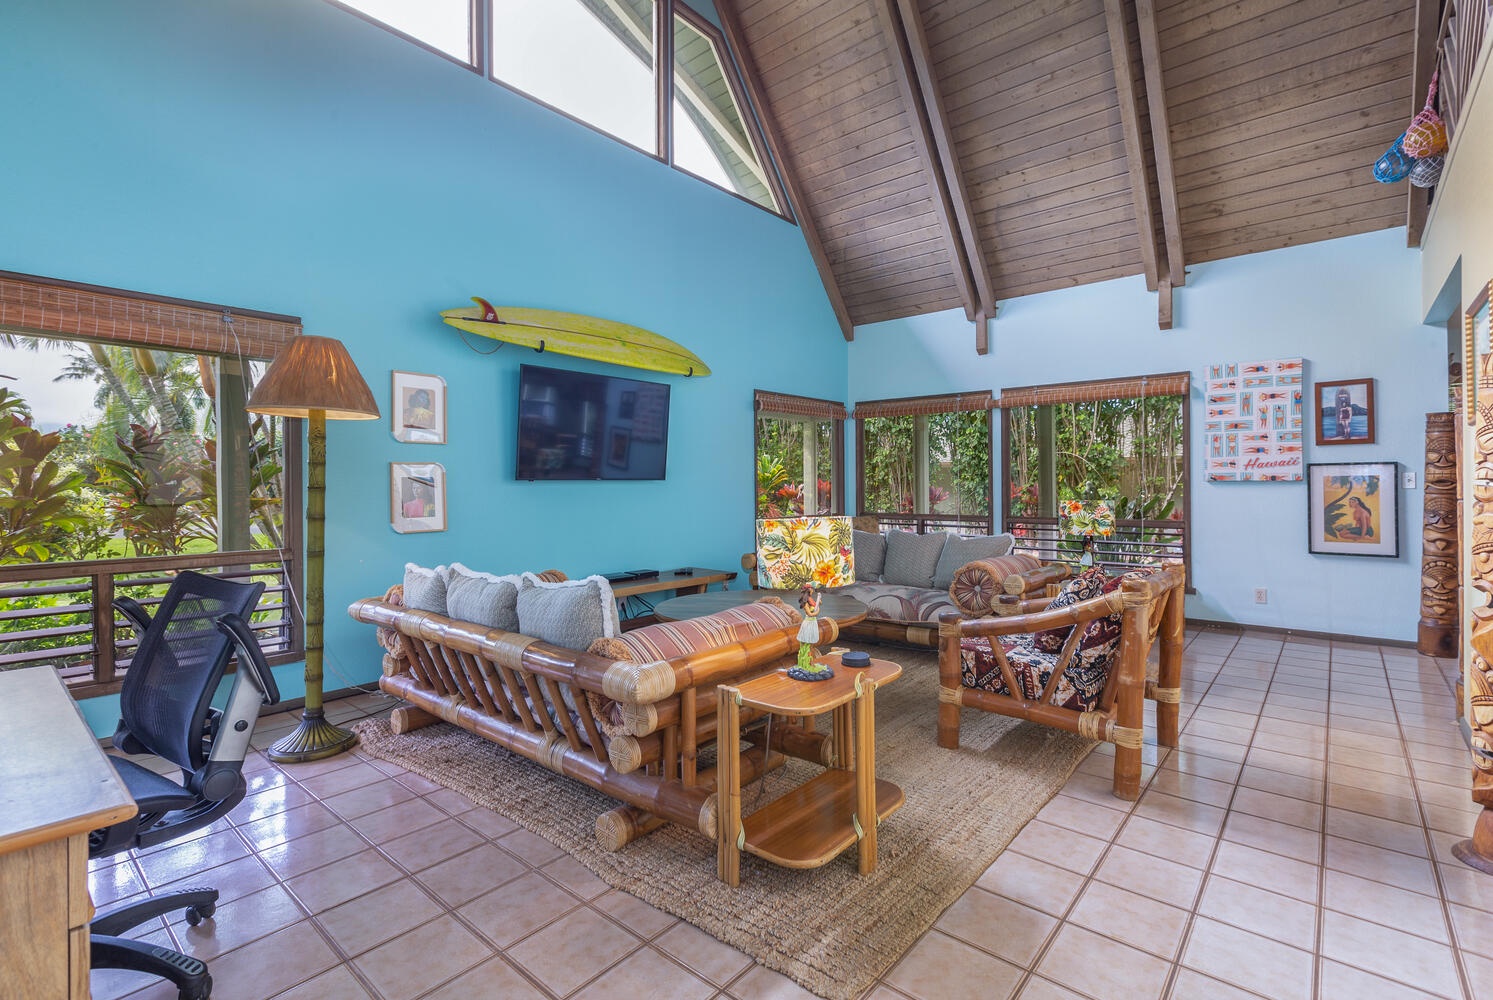 Princeville Vacation Rentals, Ailana Hale - High ceilings